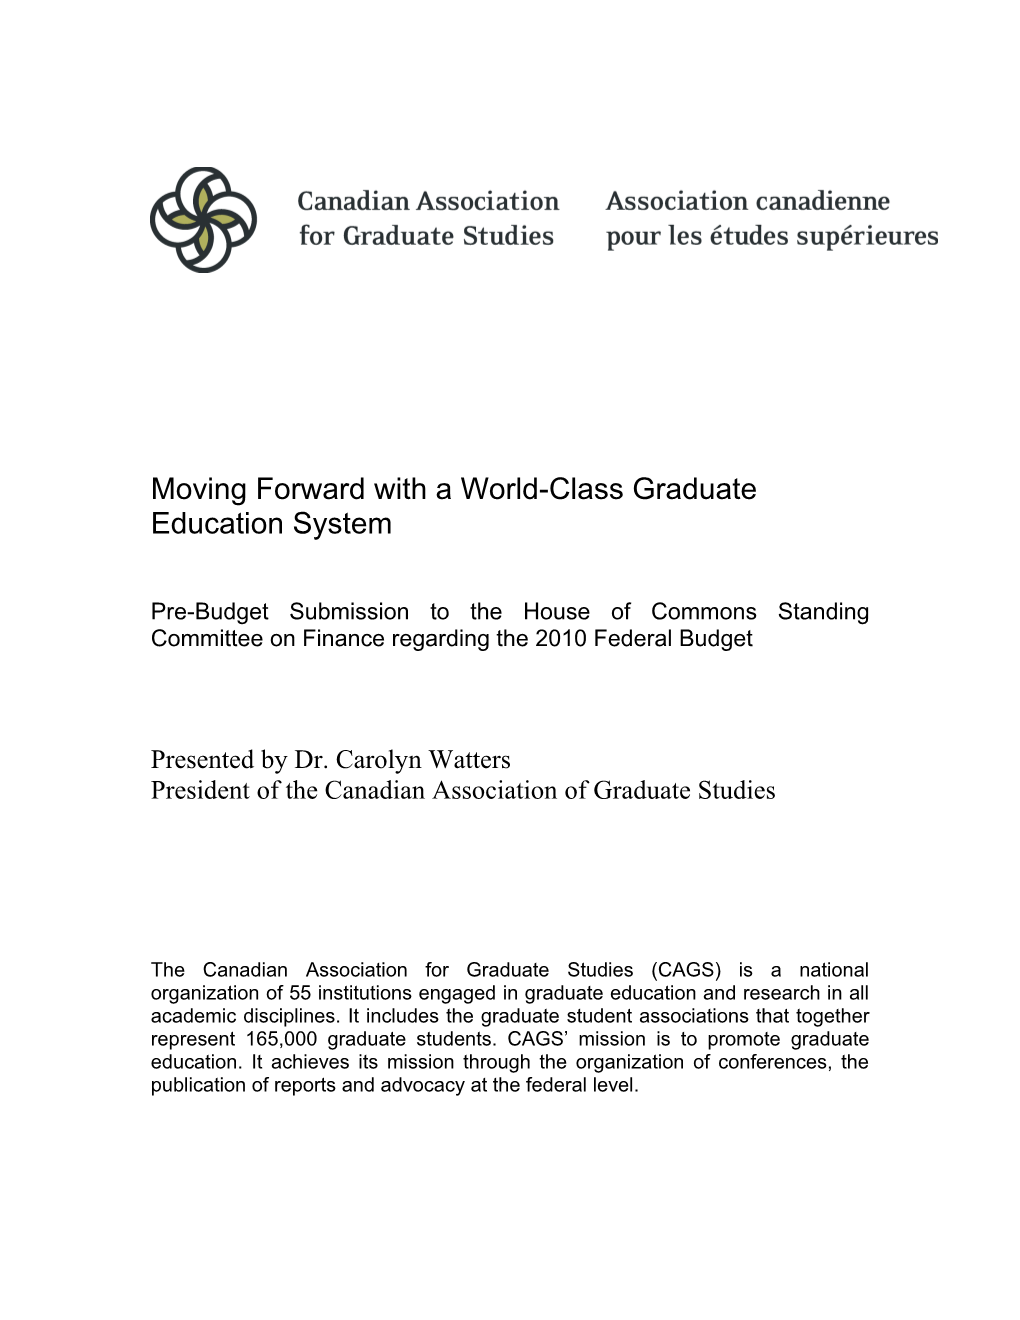 Moving Forward with a World-Class Graduate Education System